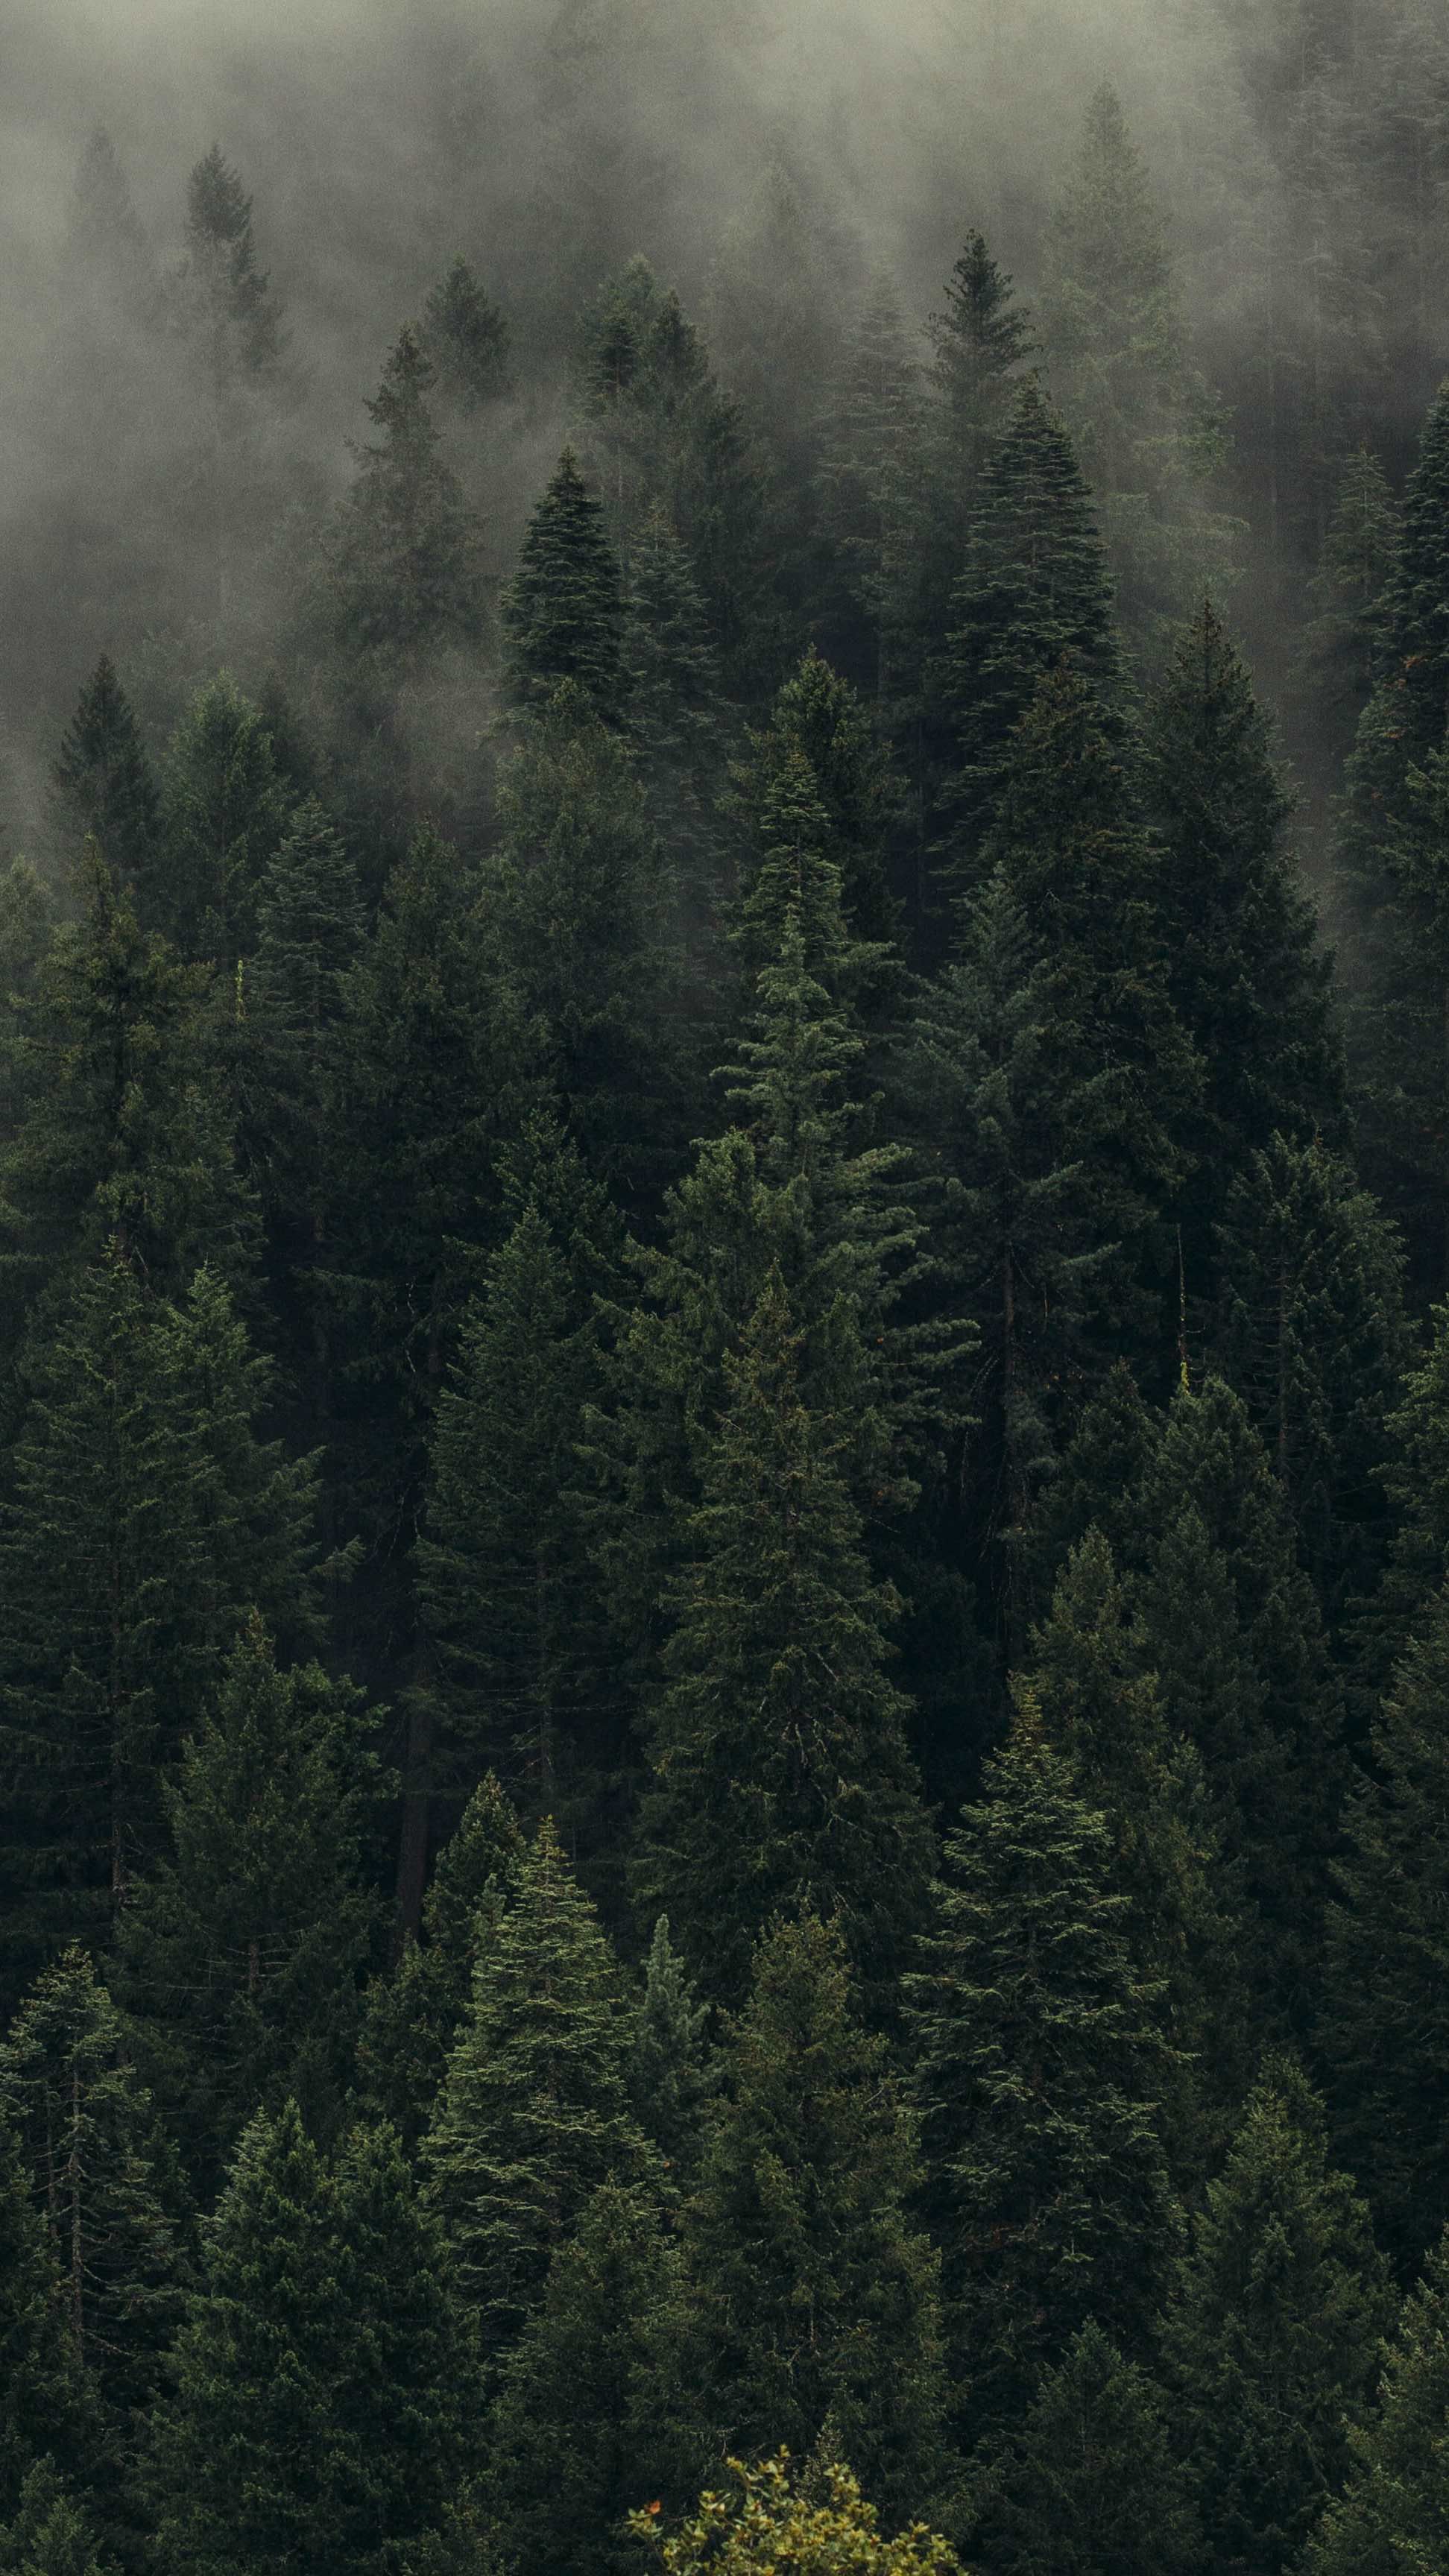 A forest of pine trees with fog in the background - Foggy forest, forest